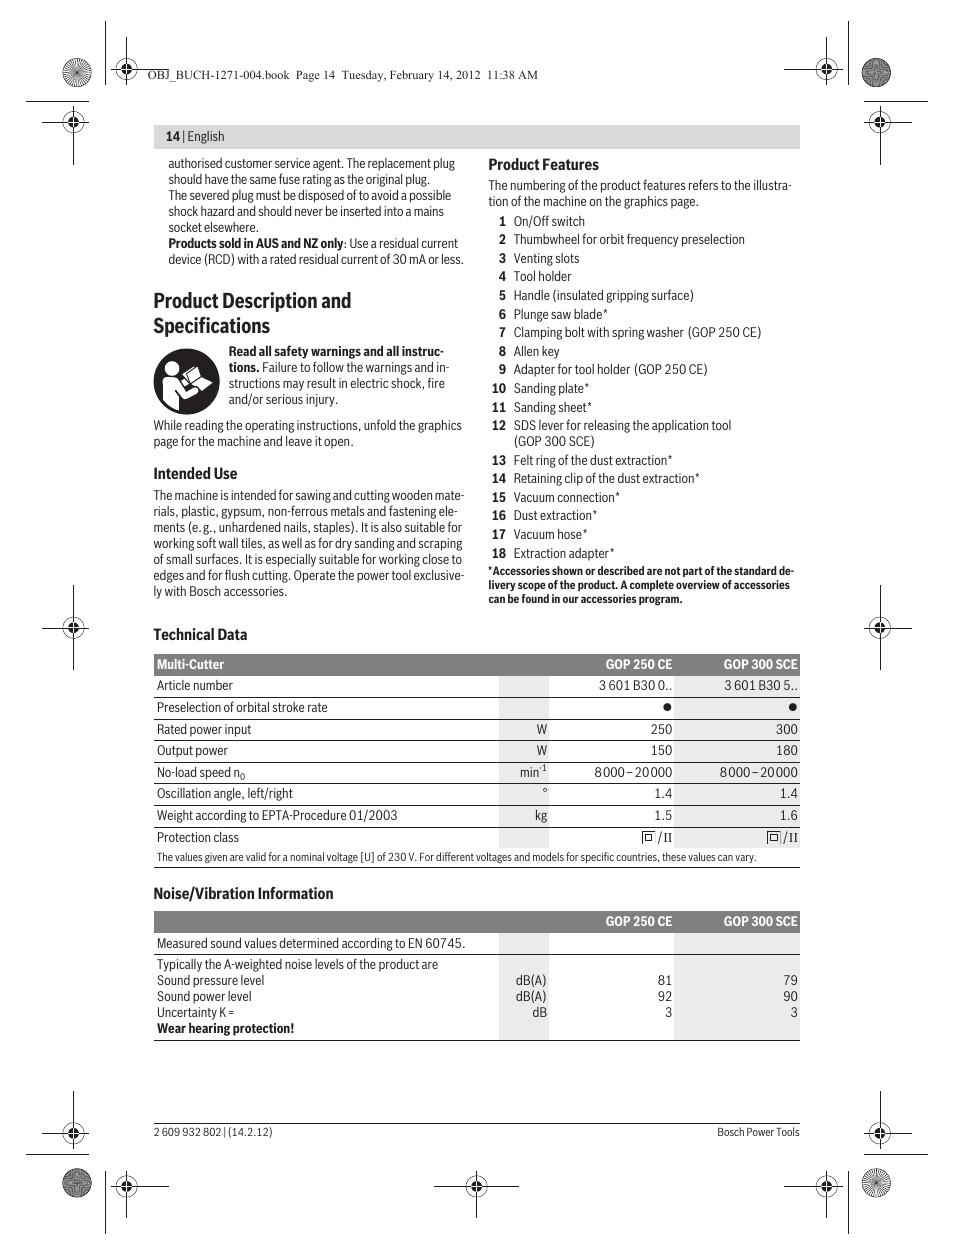 Product description and specifications | GOP CE Professional User Manual | Page 14 / 199